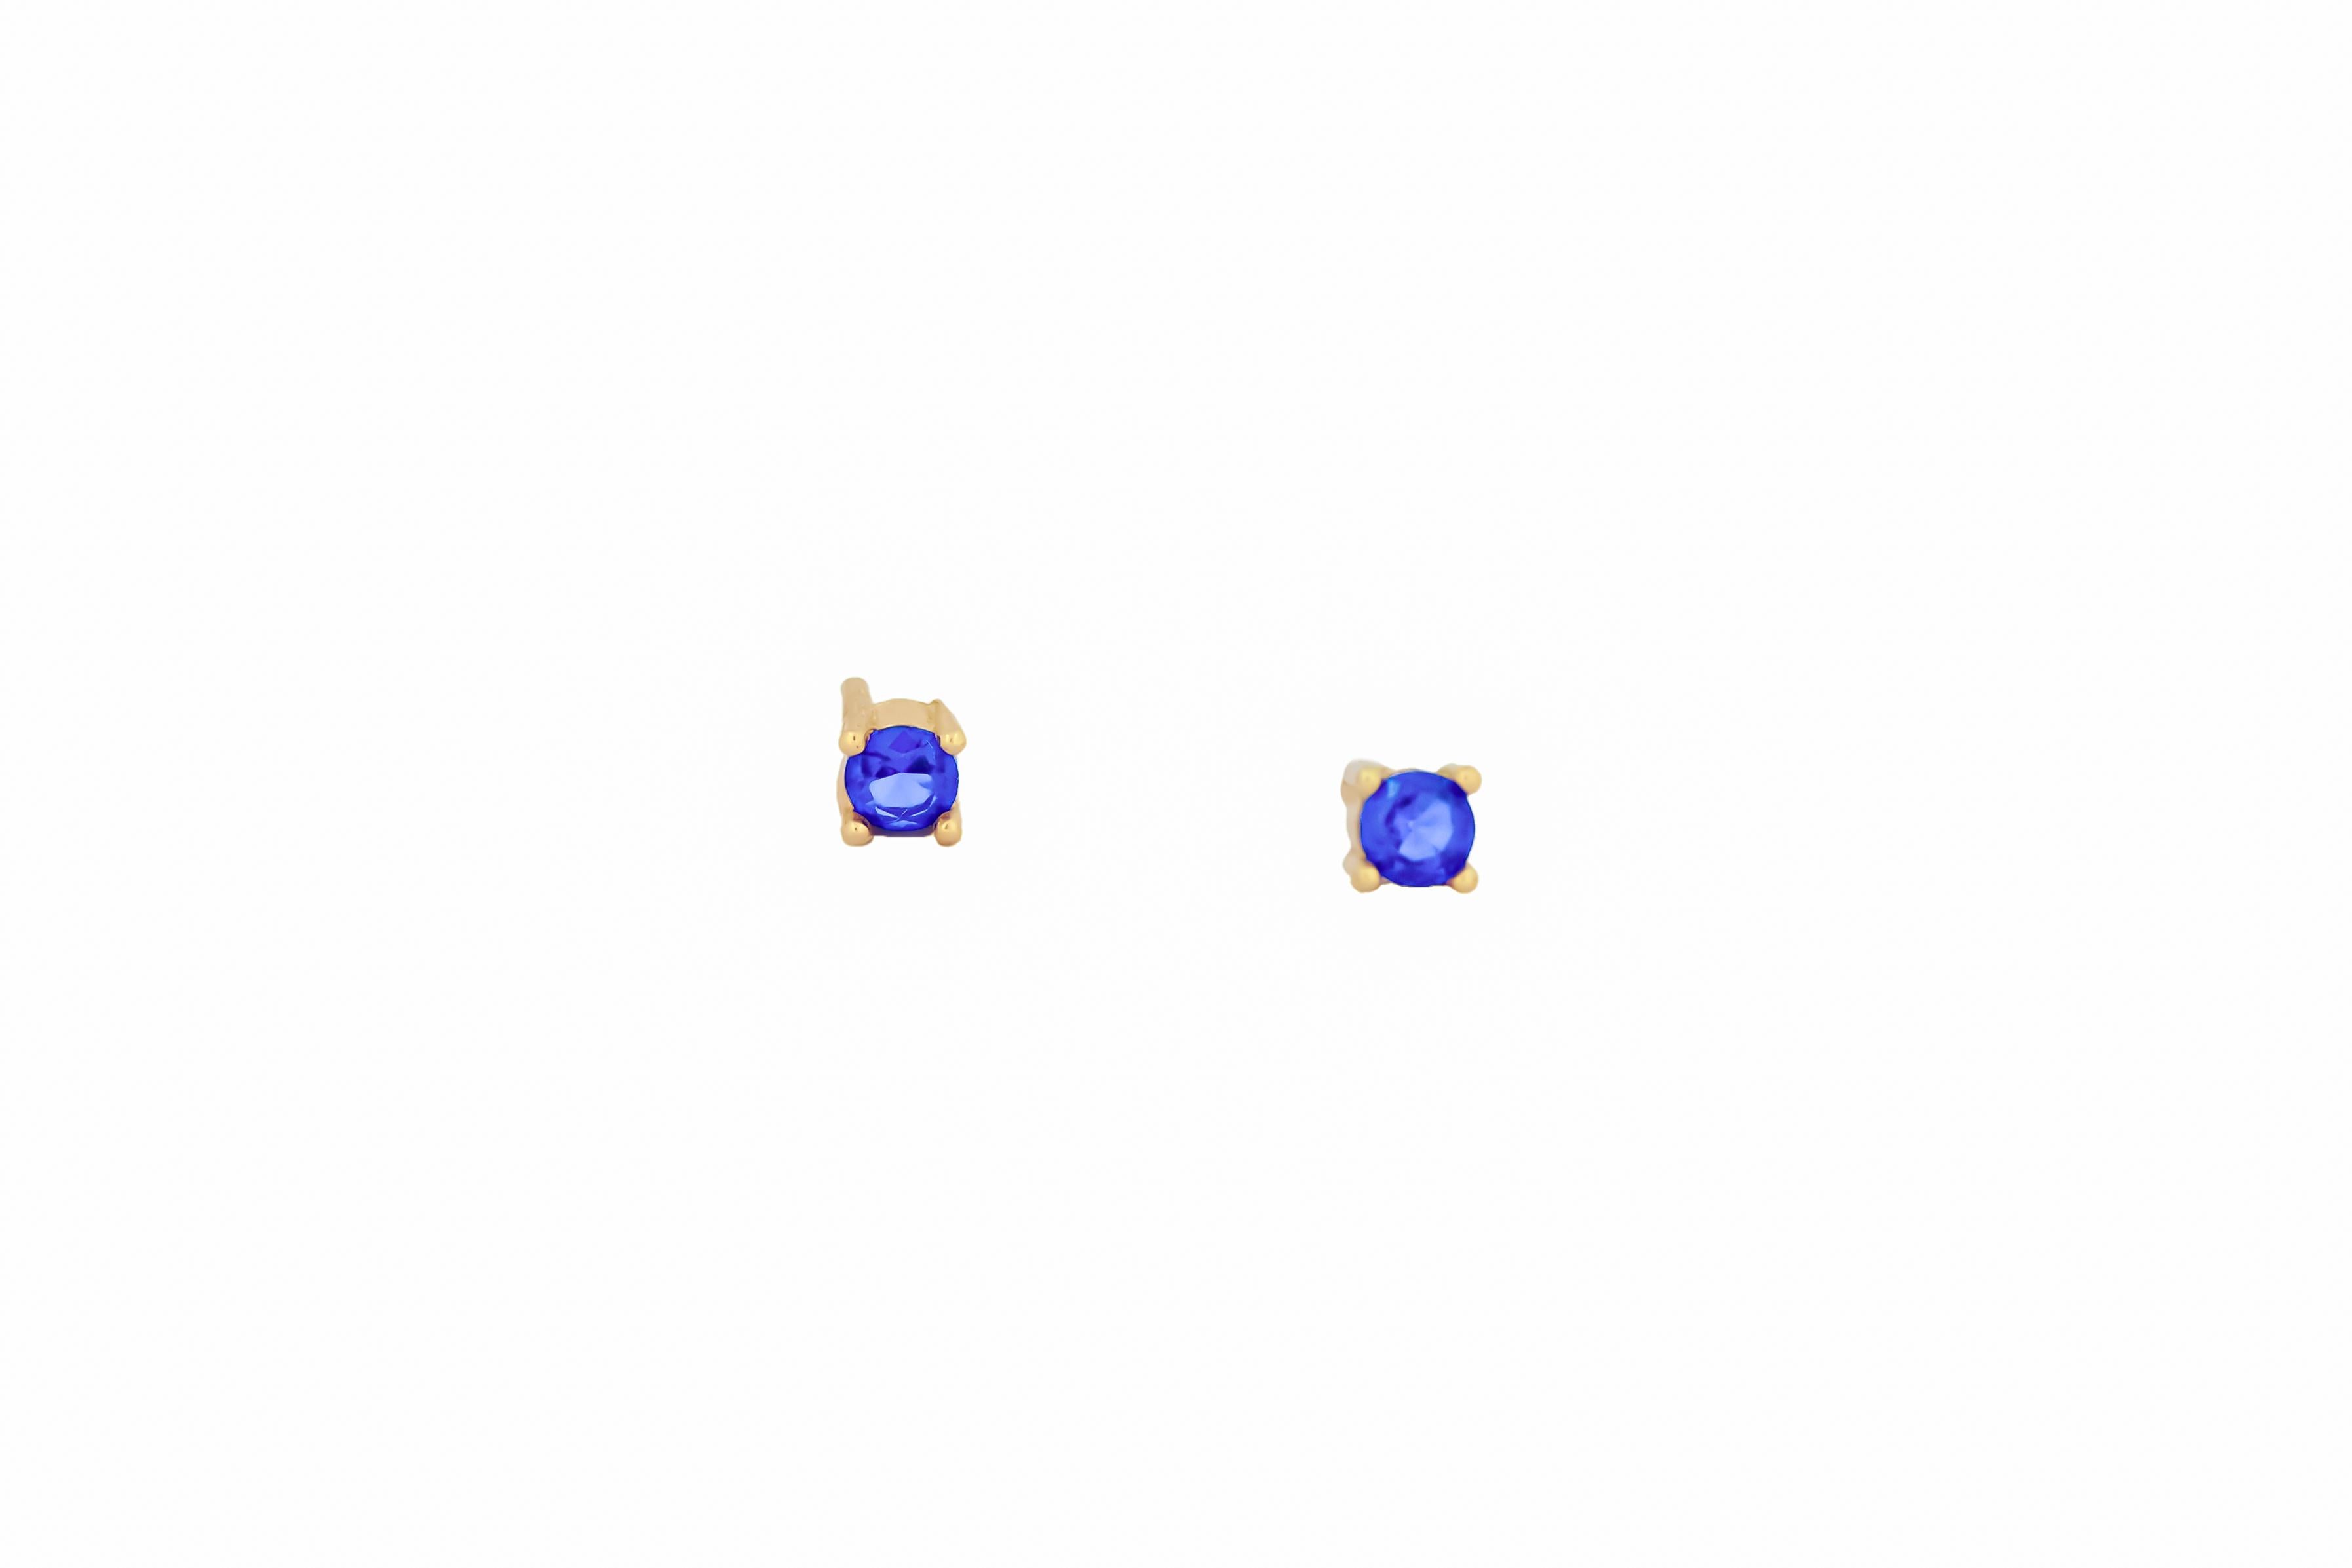 Round Cut 14 ct Gold Lab Sapphire Stud Earrings. For Sale